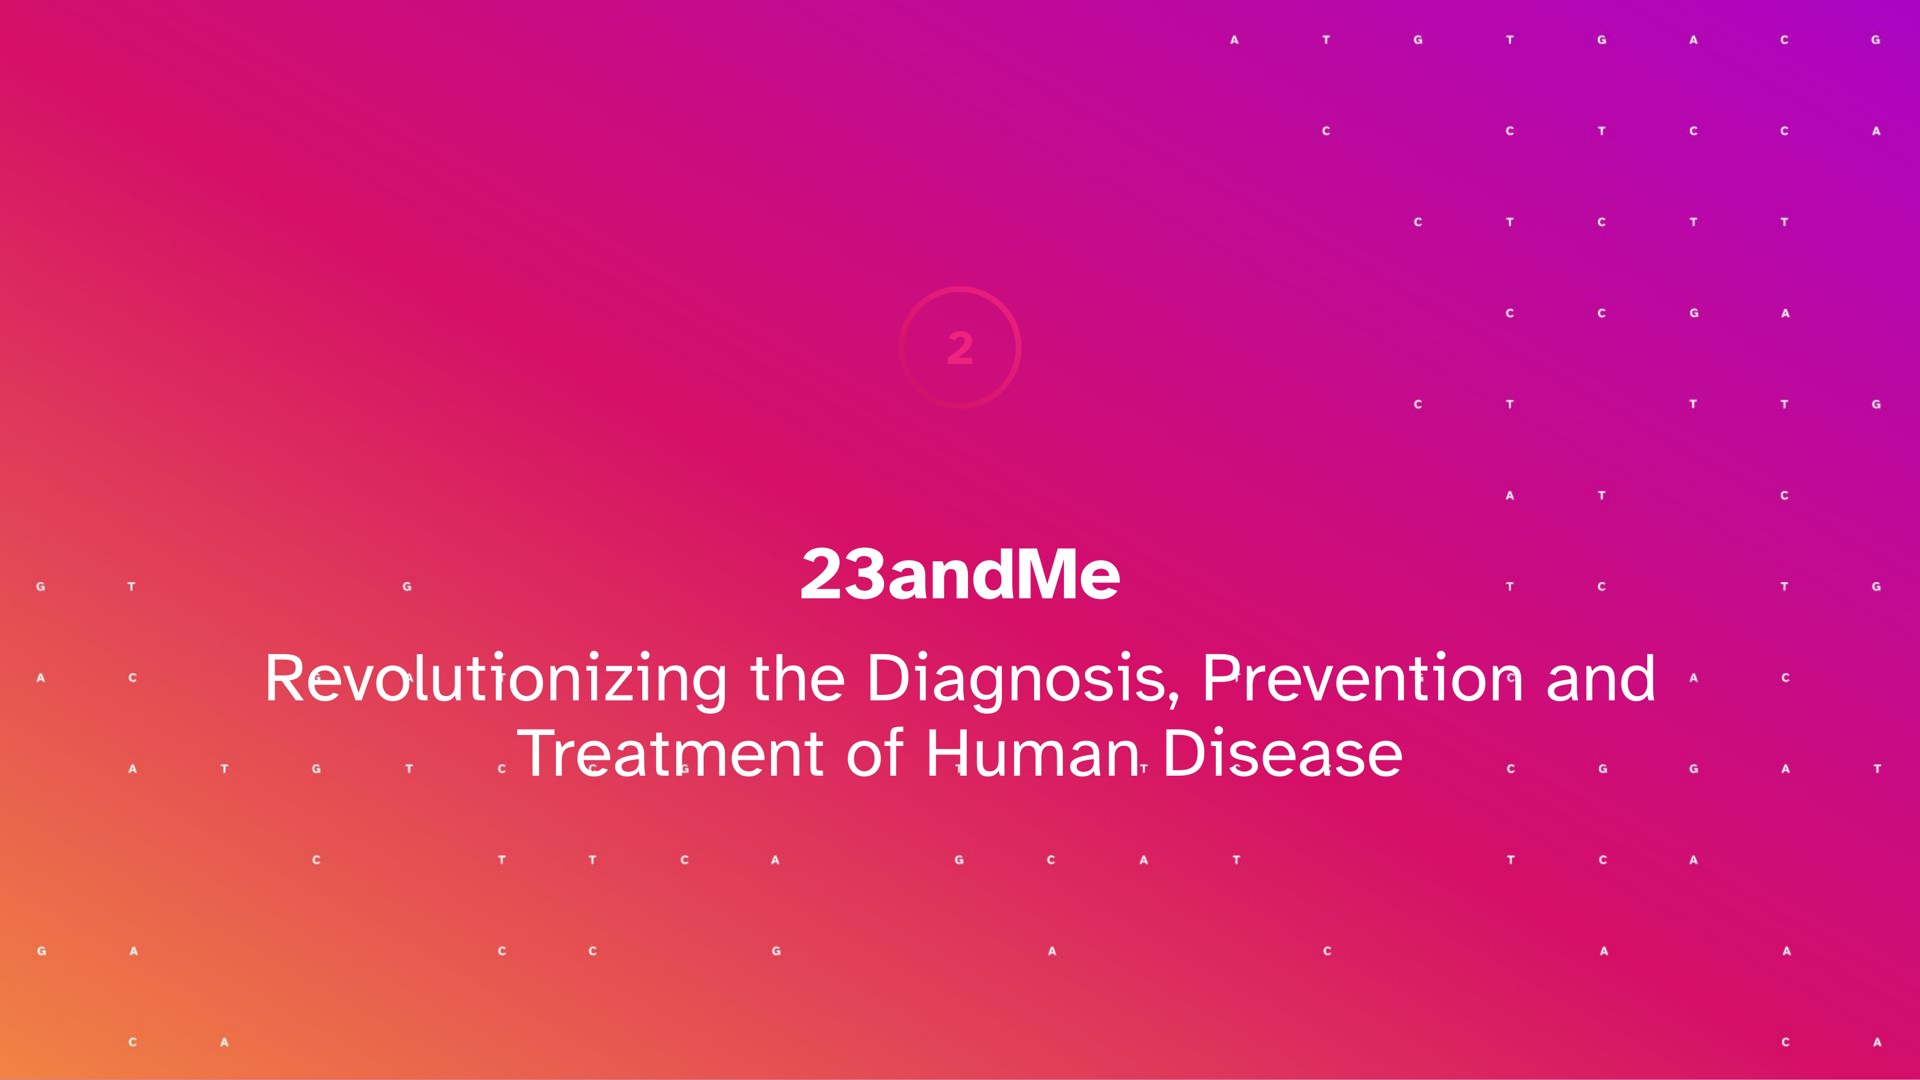 revolutionizing the diagnosis prevention and treatment of human disease | 23andMe